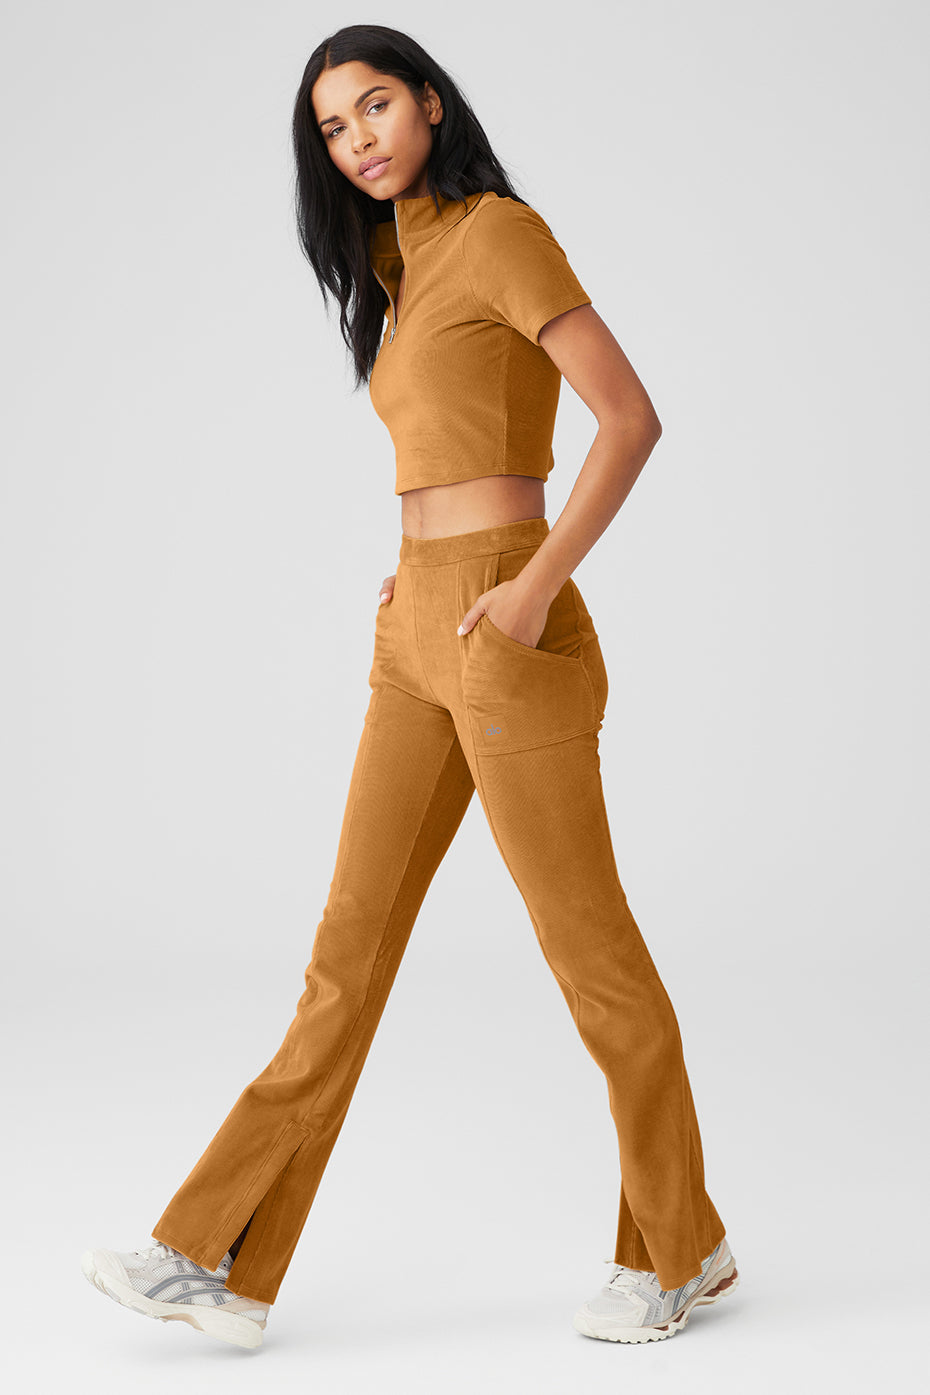 Shop Corduroy Flare Pants for Women from latest collection at Forever 21   458335